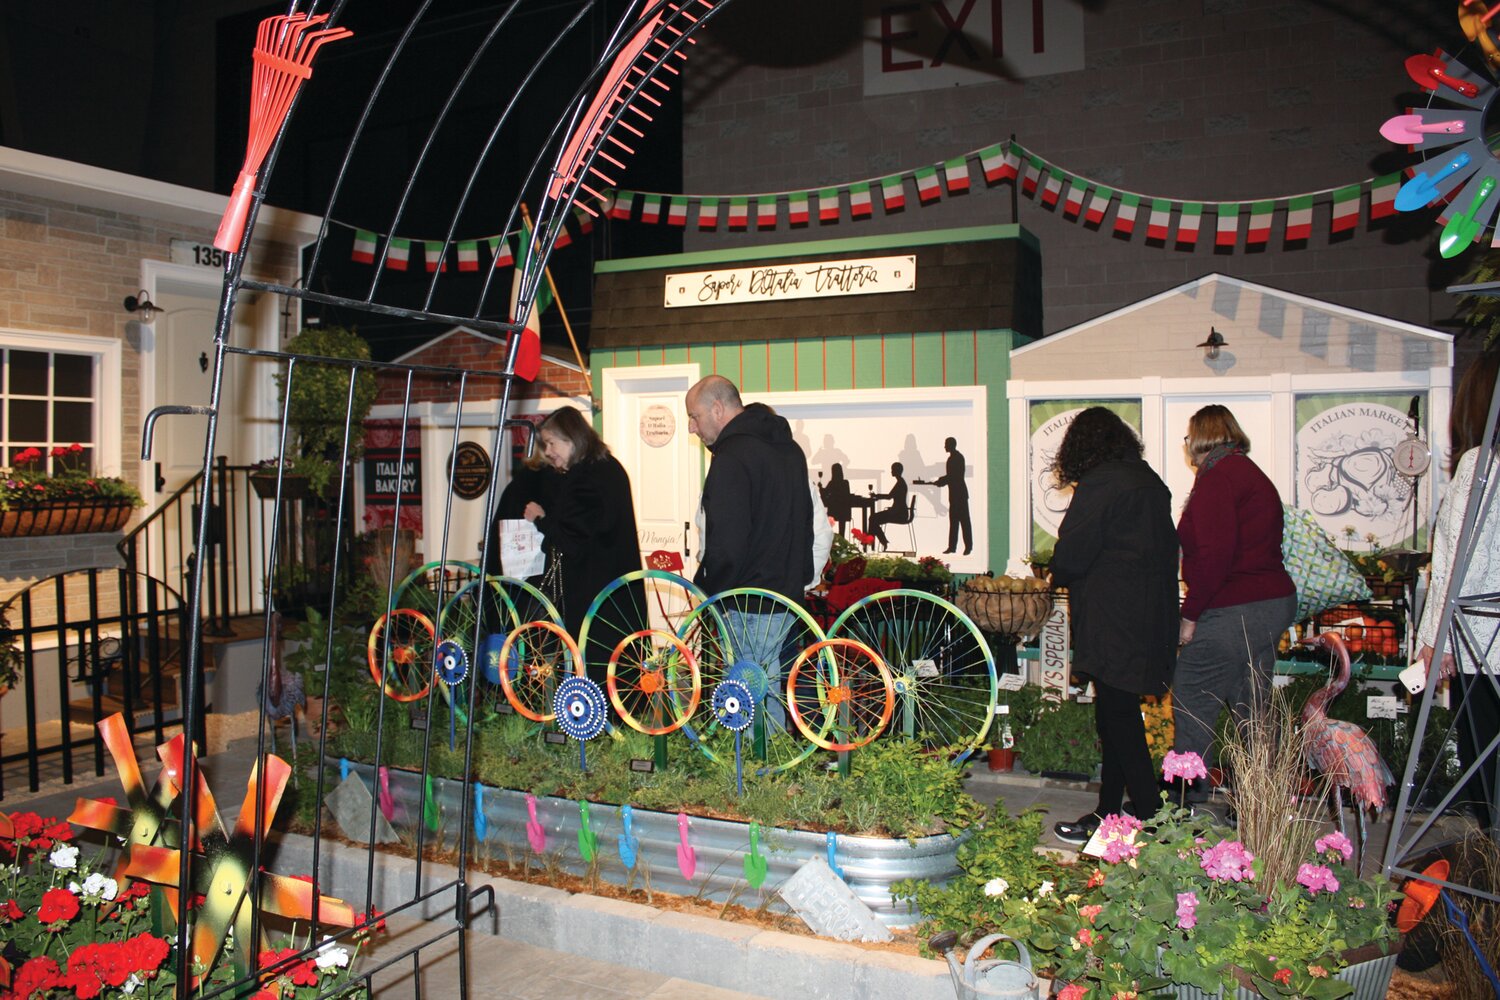 The Lakeside School Greenhouse in Horsham, Montgomery County, created a South Philadelphia-inspired scene with the backdrop of the Italian Market for its “Come Together” exhibit.”